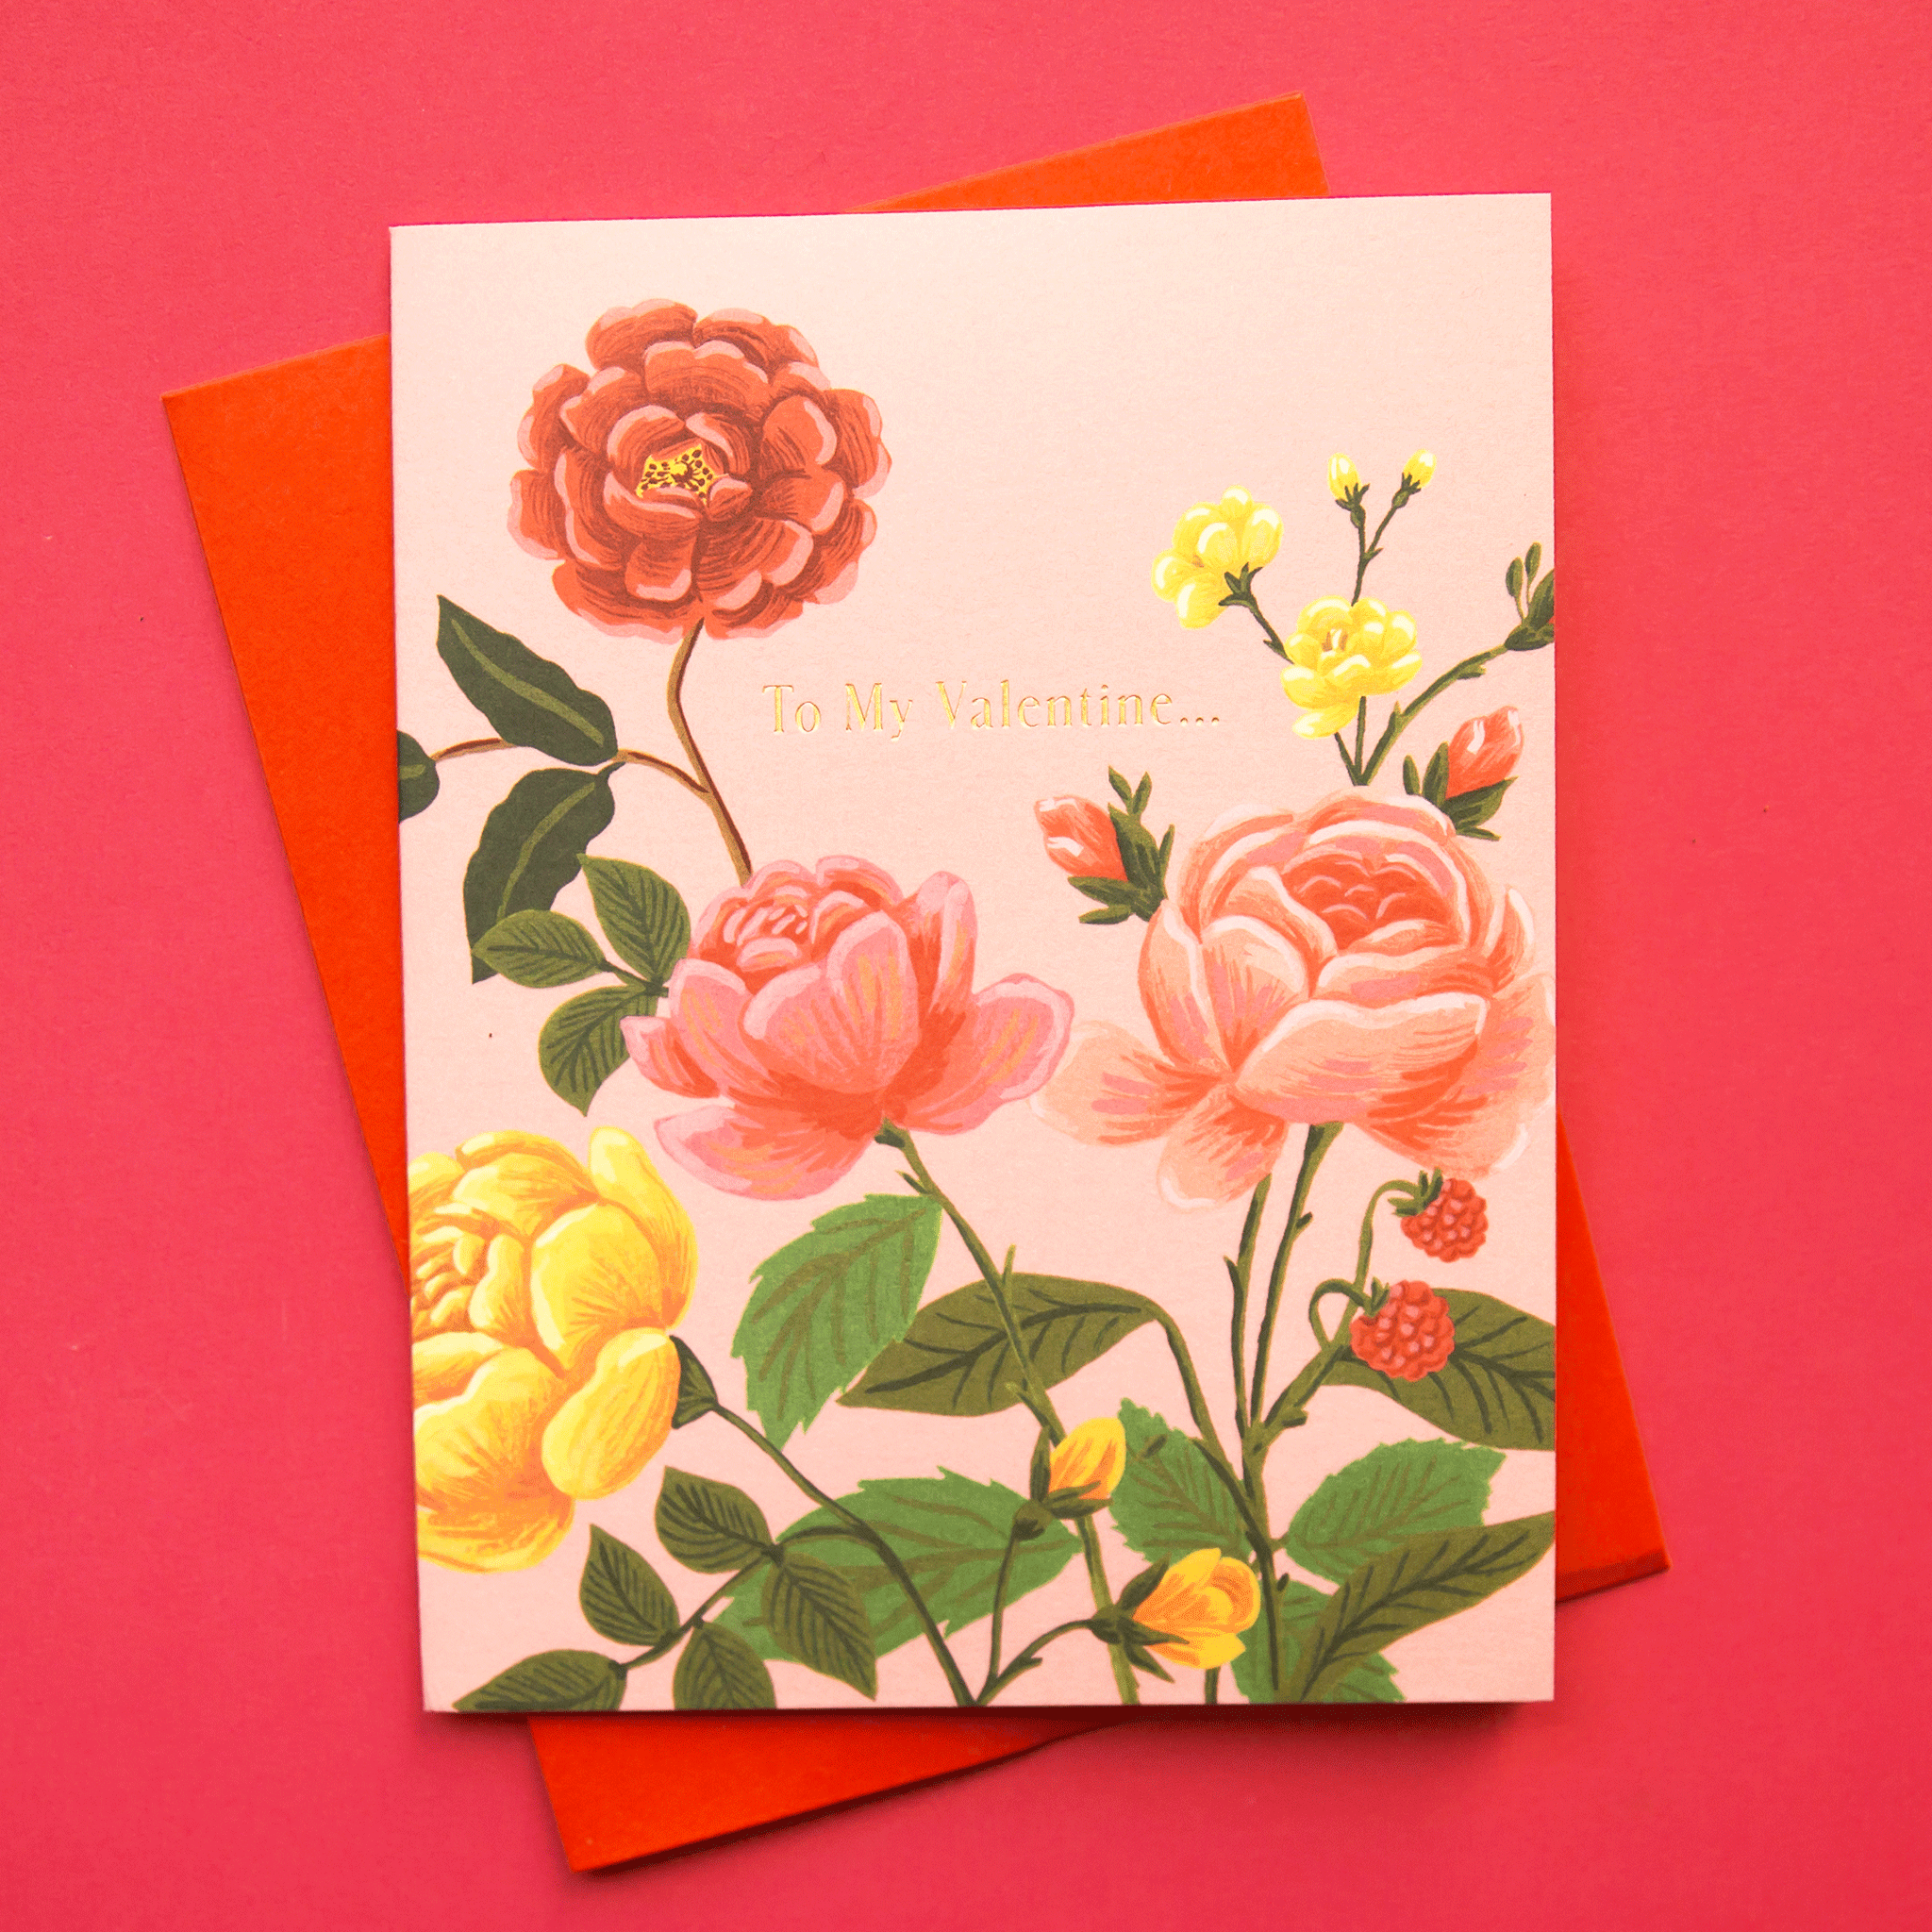 On a red background is a pink card with a floral print and text that reads, &quot;To My Valentine...&quot; as well as a coordinating red envelope.